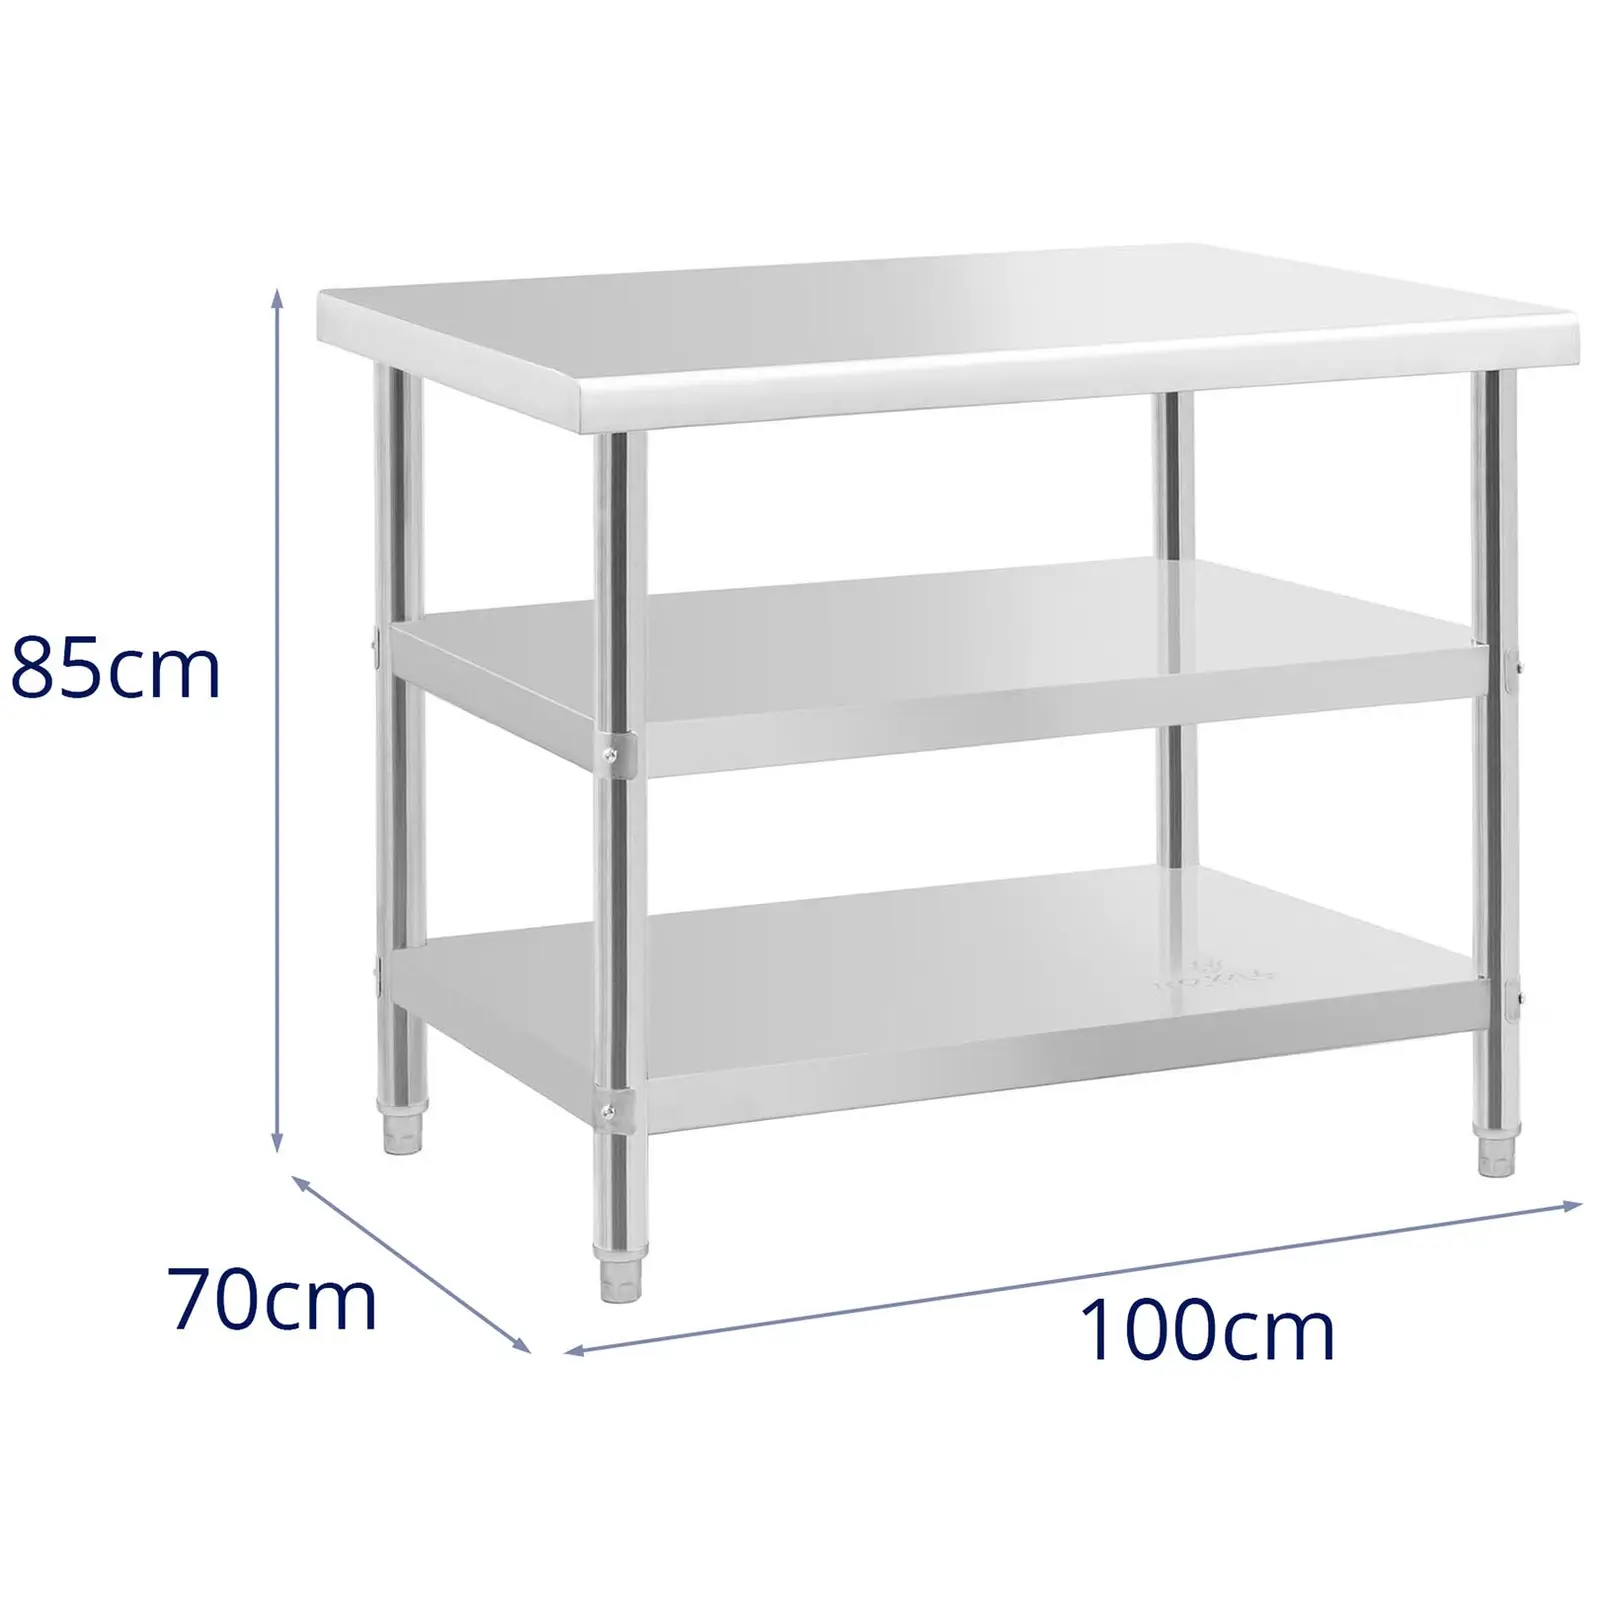 Stainless steel table - 100 x 70 x 5 cm - 190 kg - 2 shelves - Royal Catering